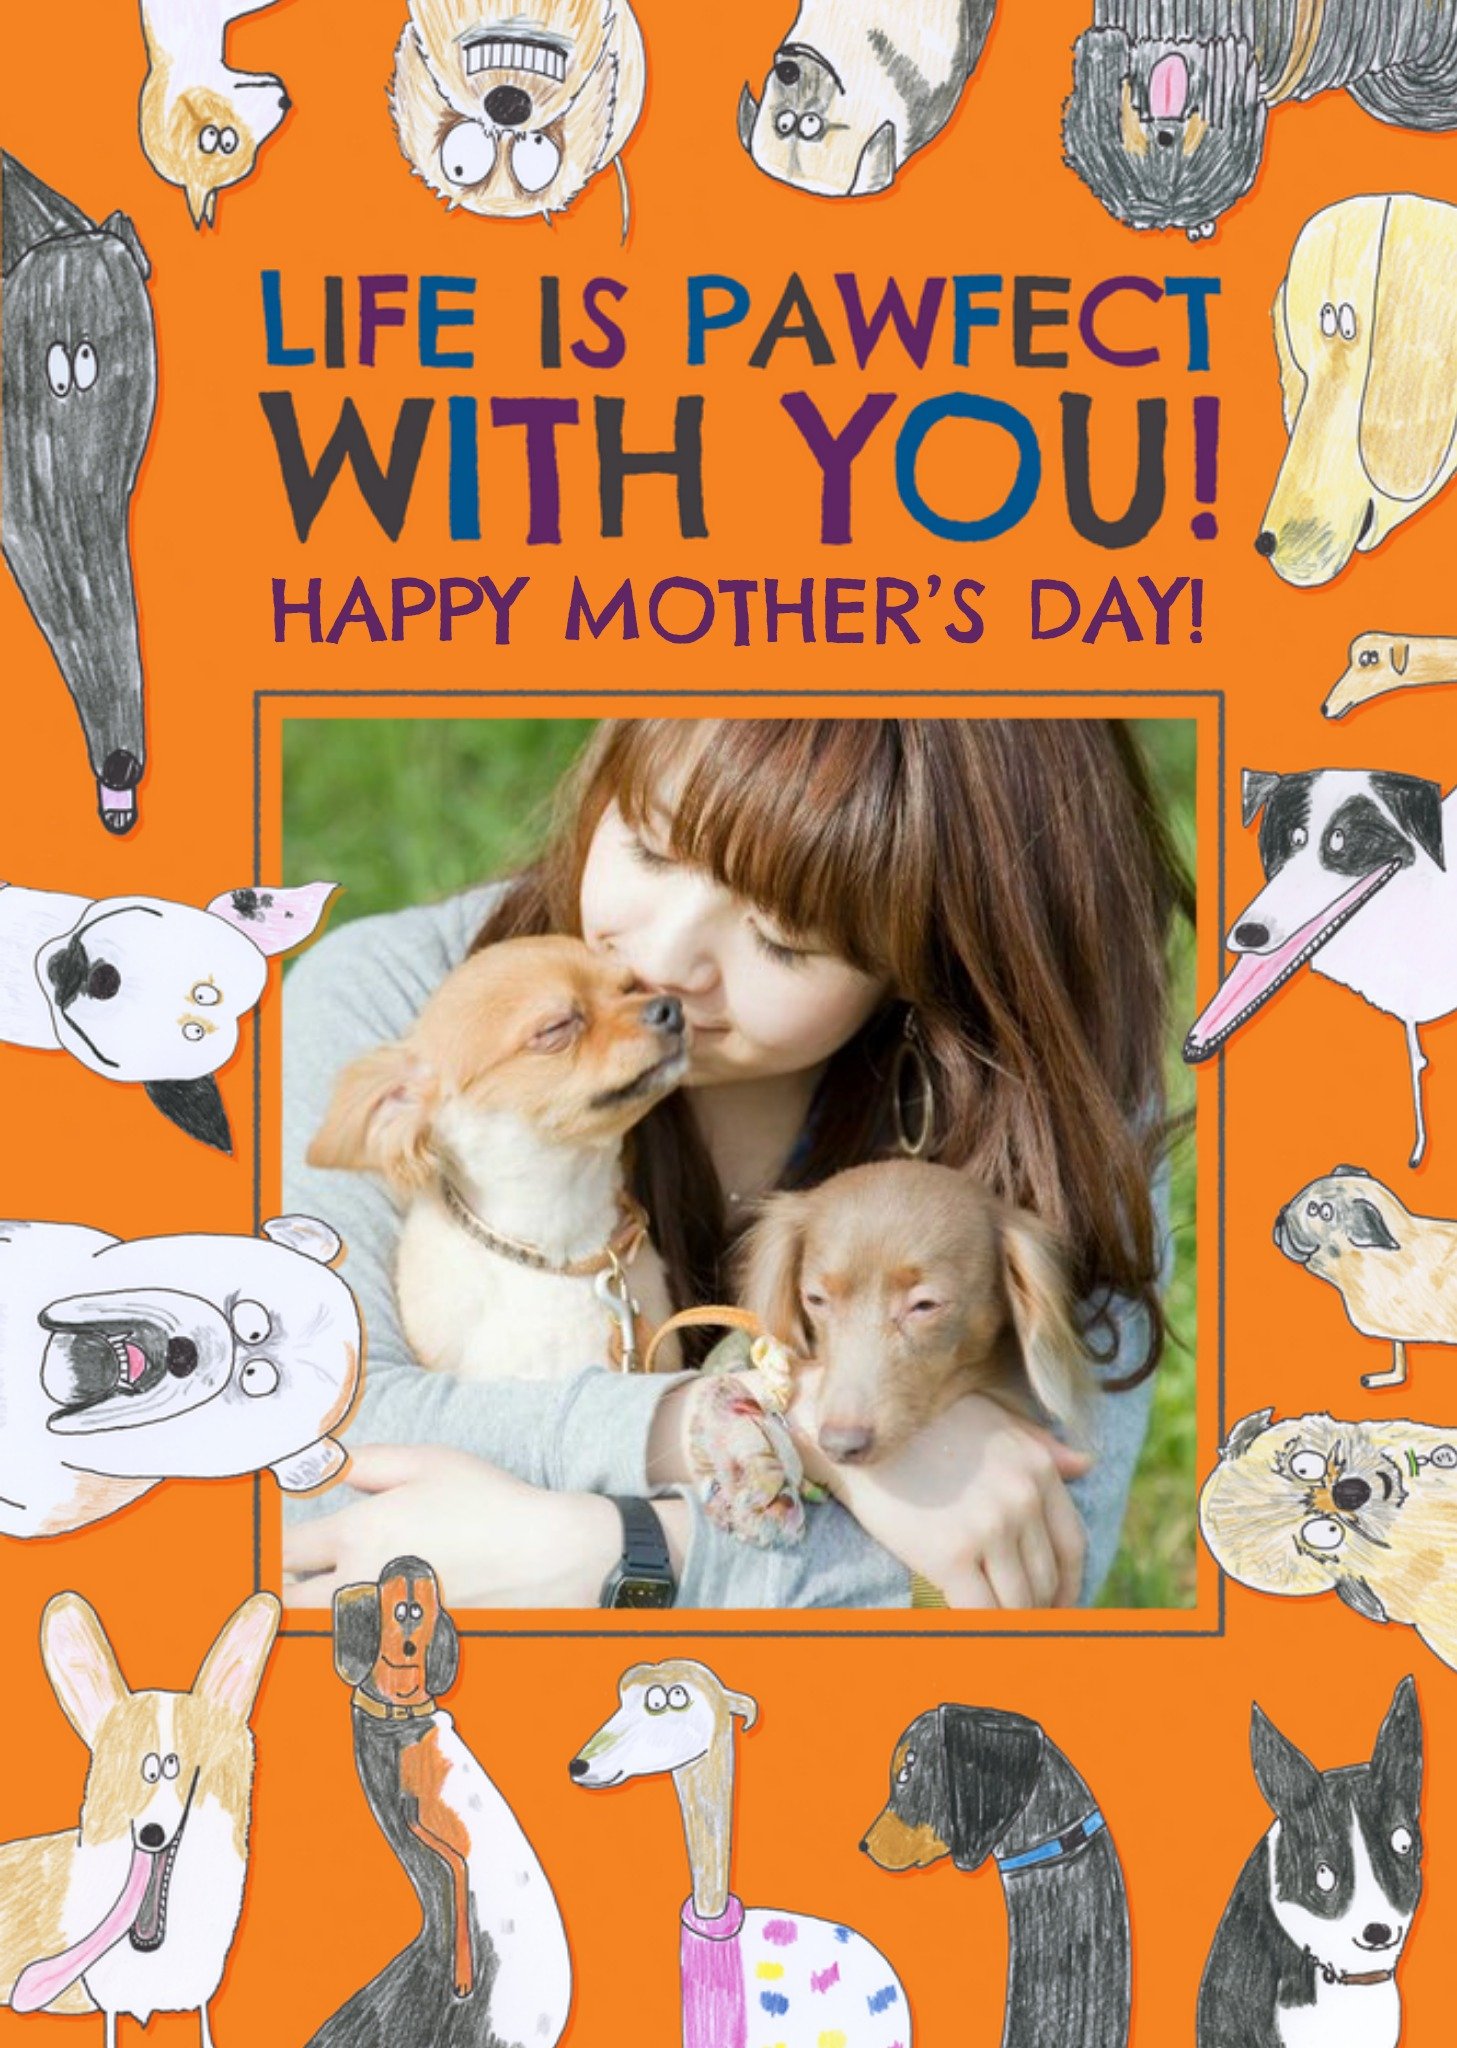 Hercule Van Wolfwinkle Quirky Illustrations Of Dogs Humorous Photo Upload Mother's Day Card Ecard